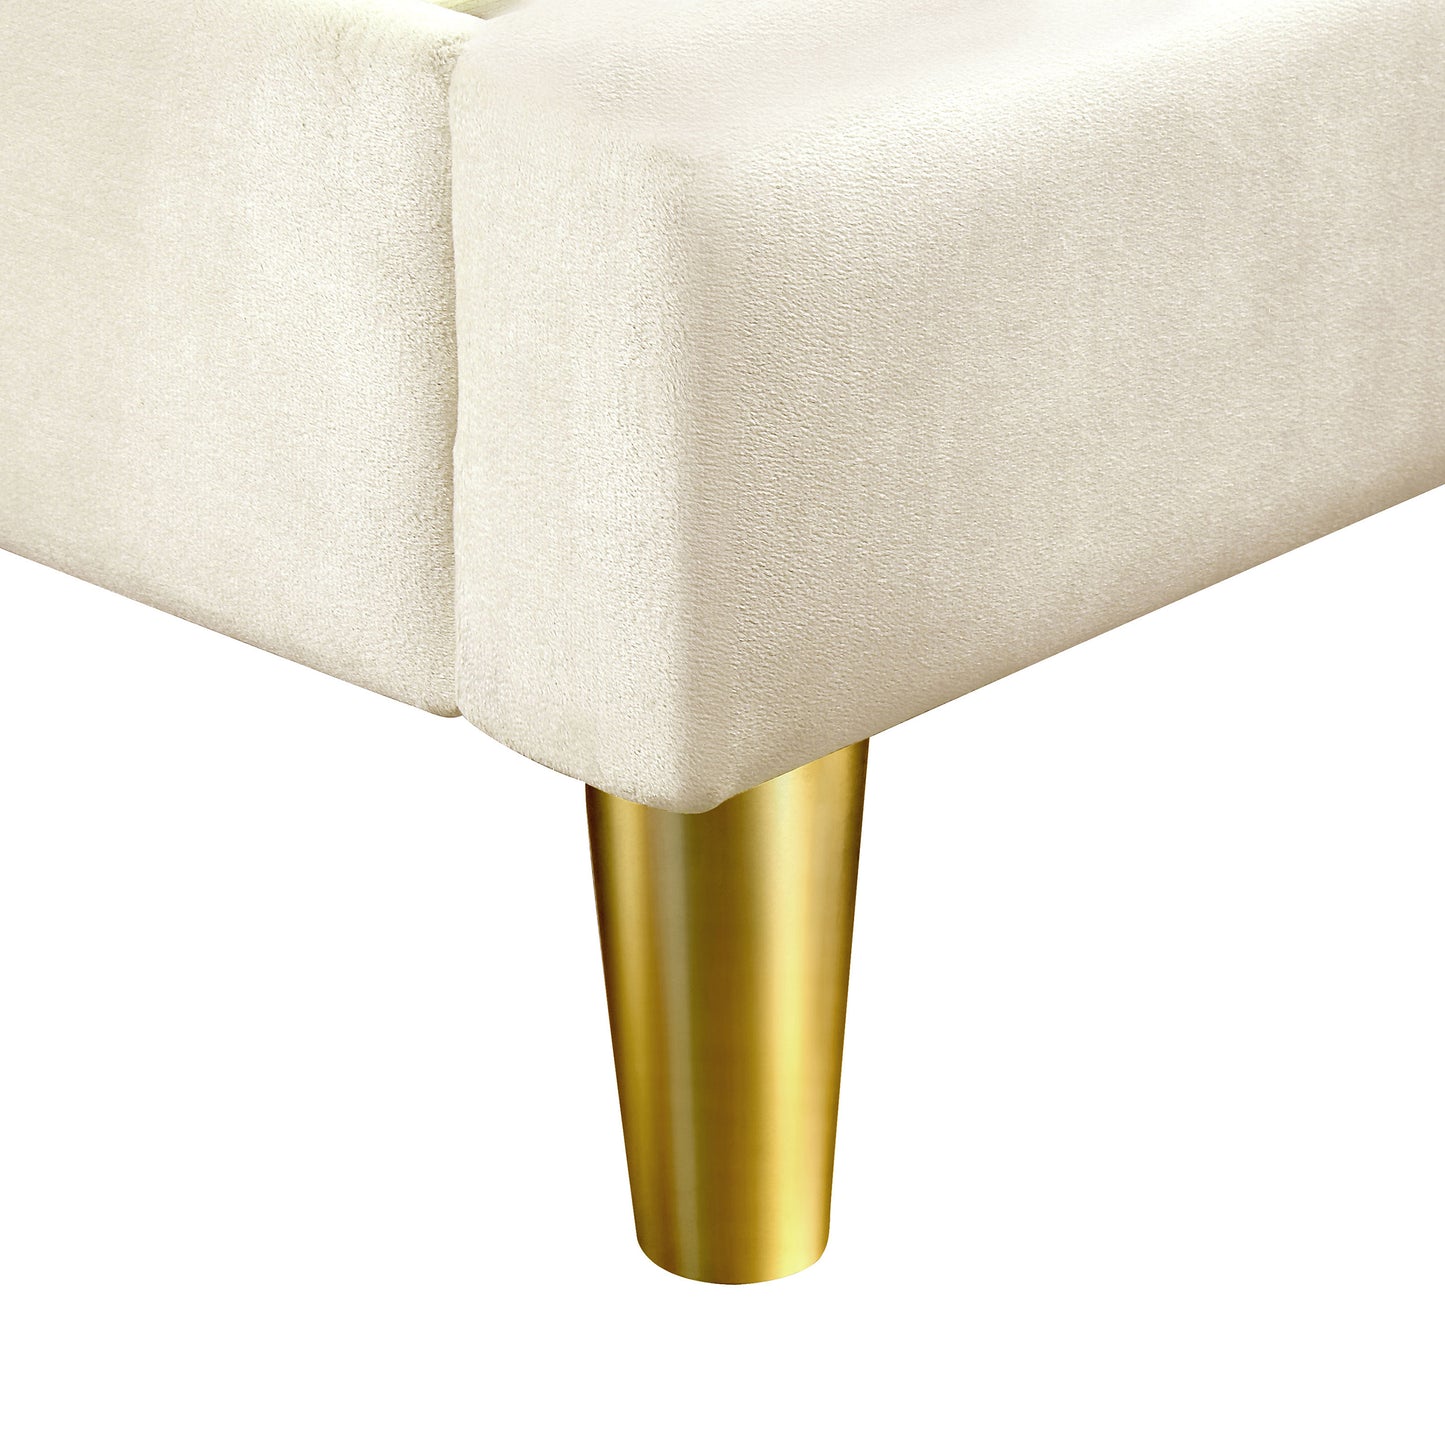 Right angled leg close-up view of a contemporary beige and gold upholstered eastern king bed on a white background